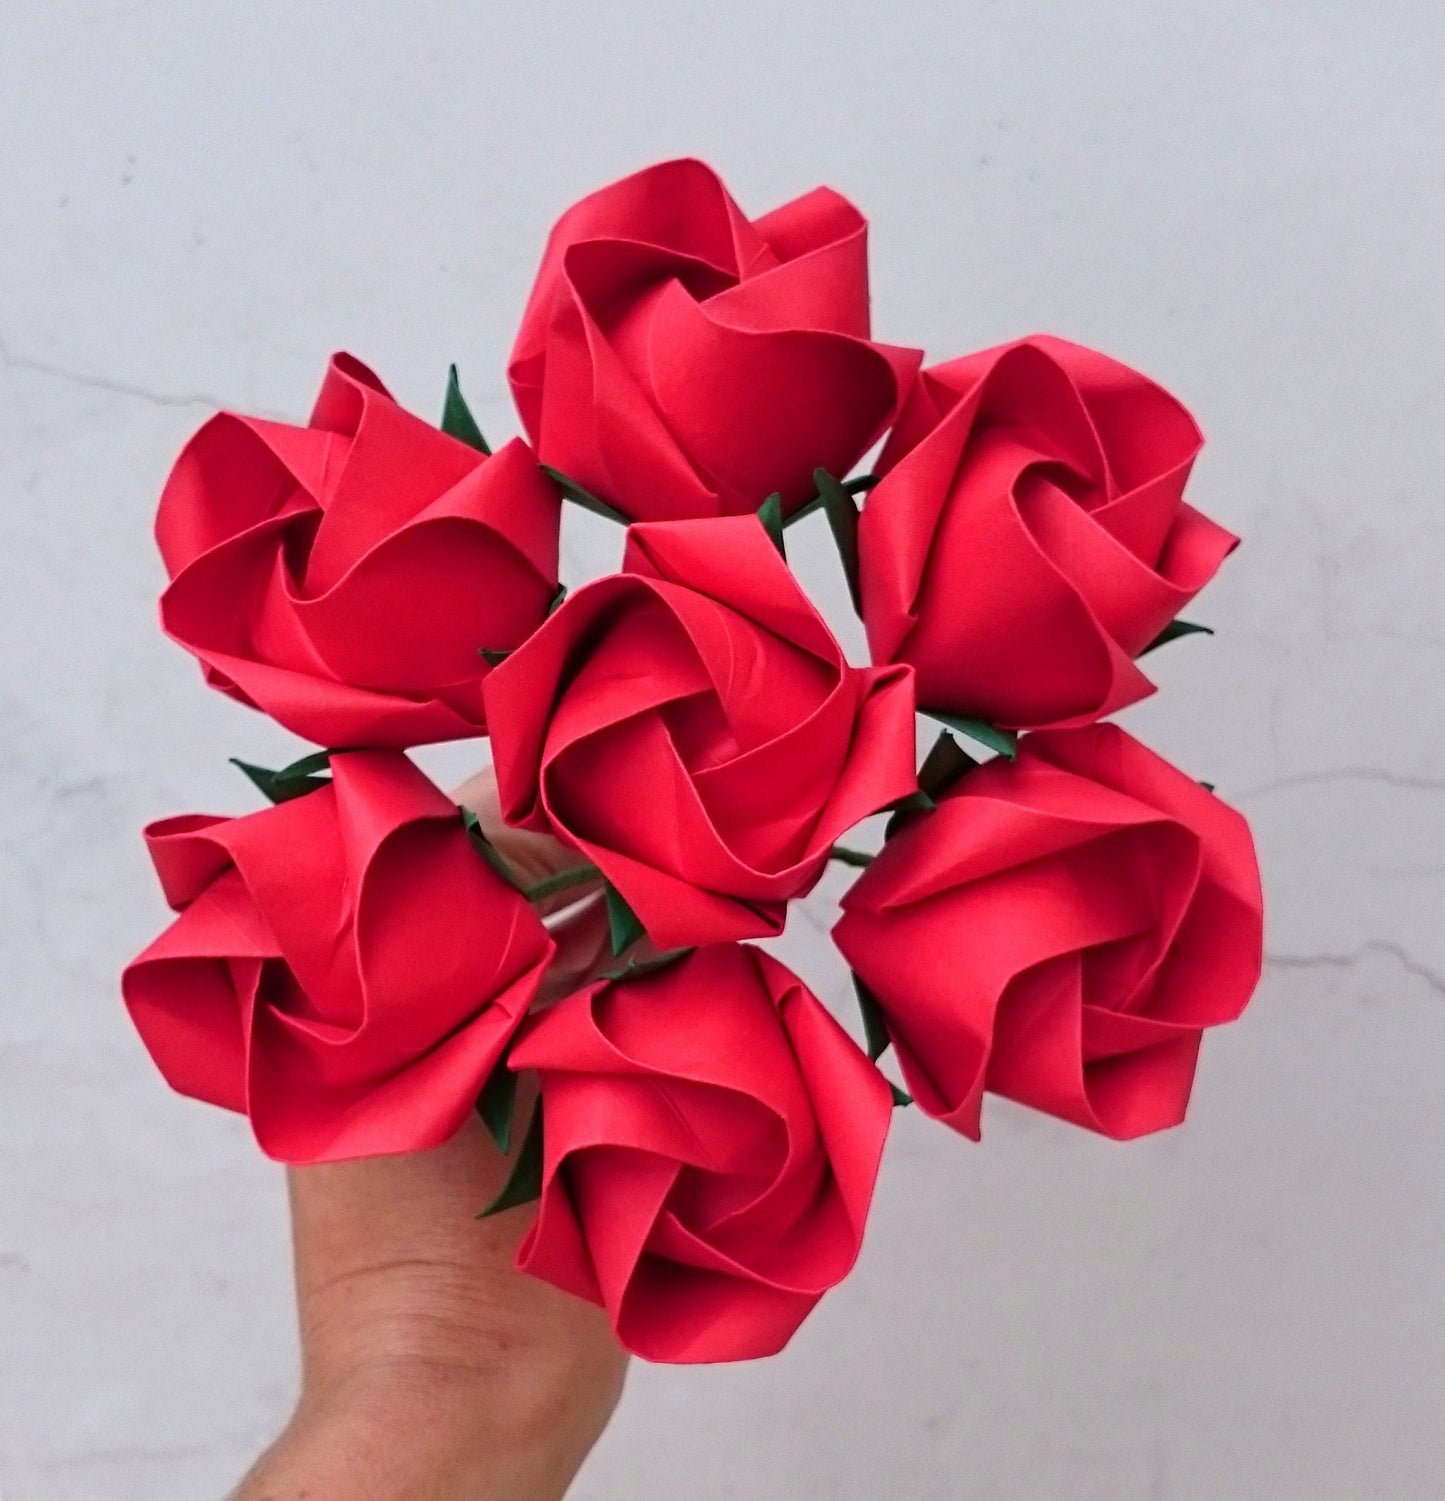 Red origami paper roses gift bouquet